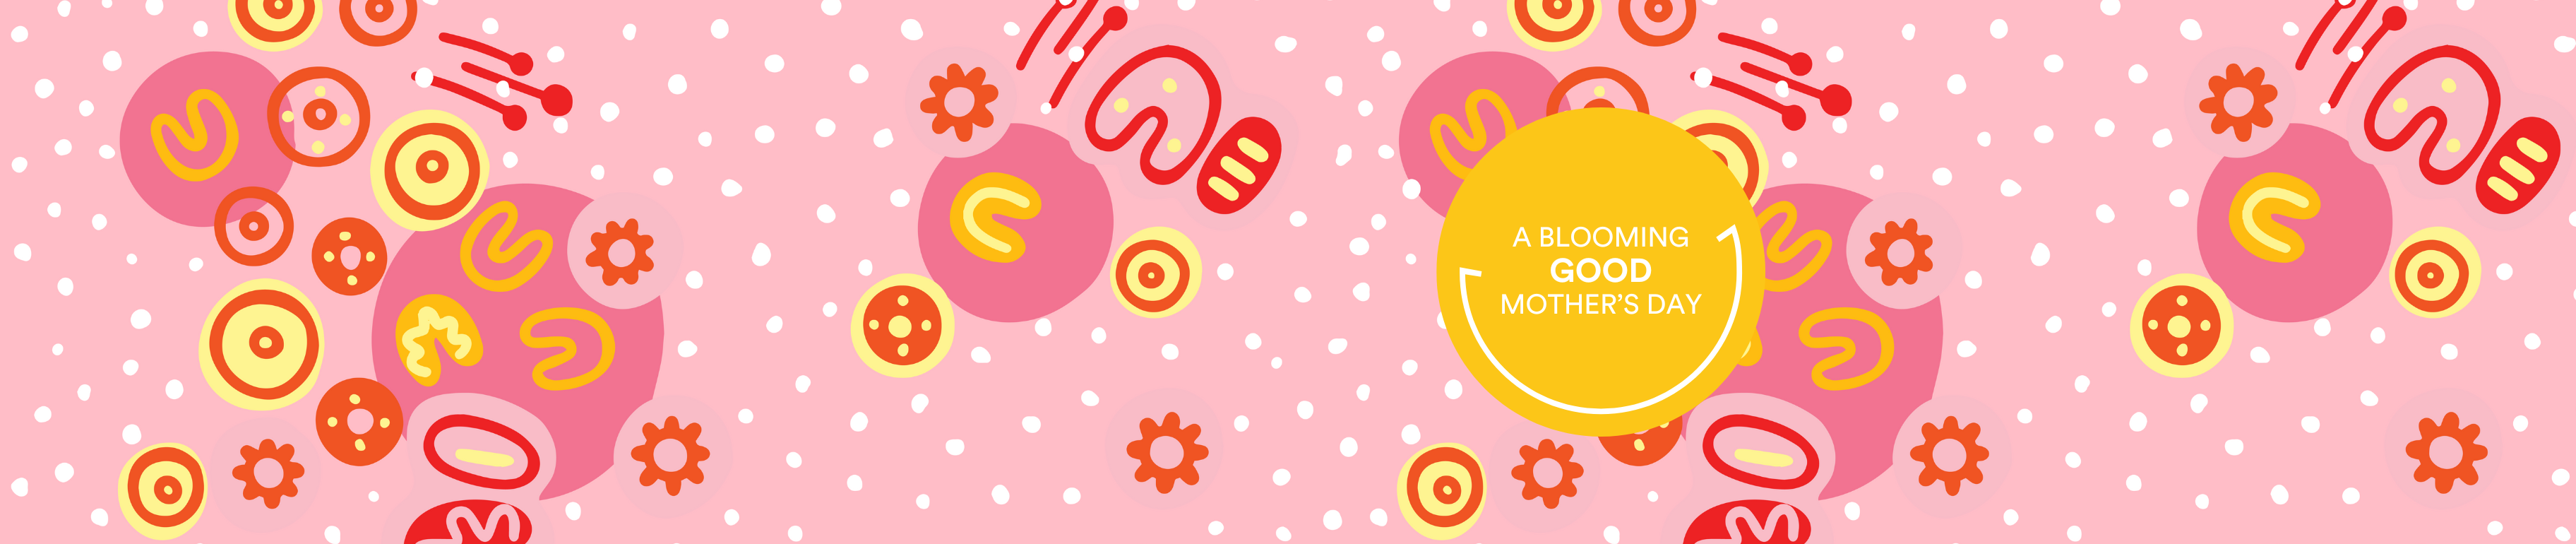 AW24 Mother's Day Web Hero Banner 3648x770px.png